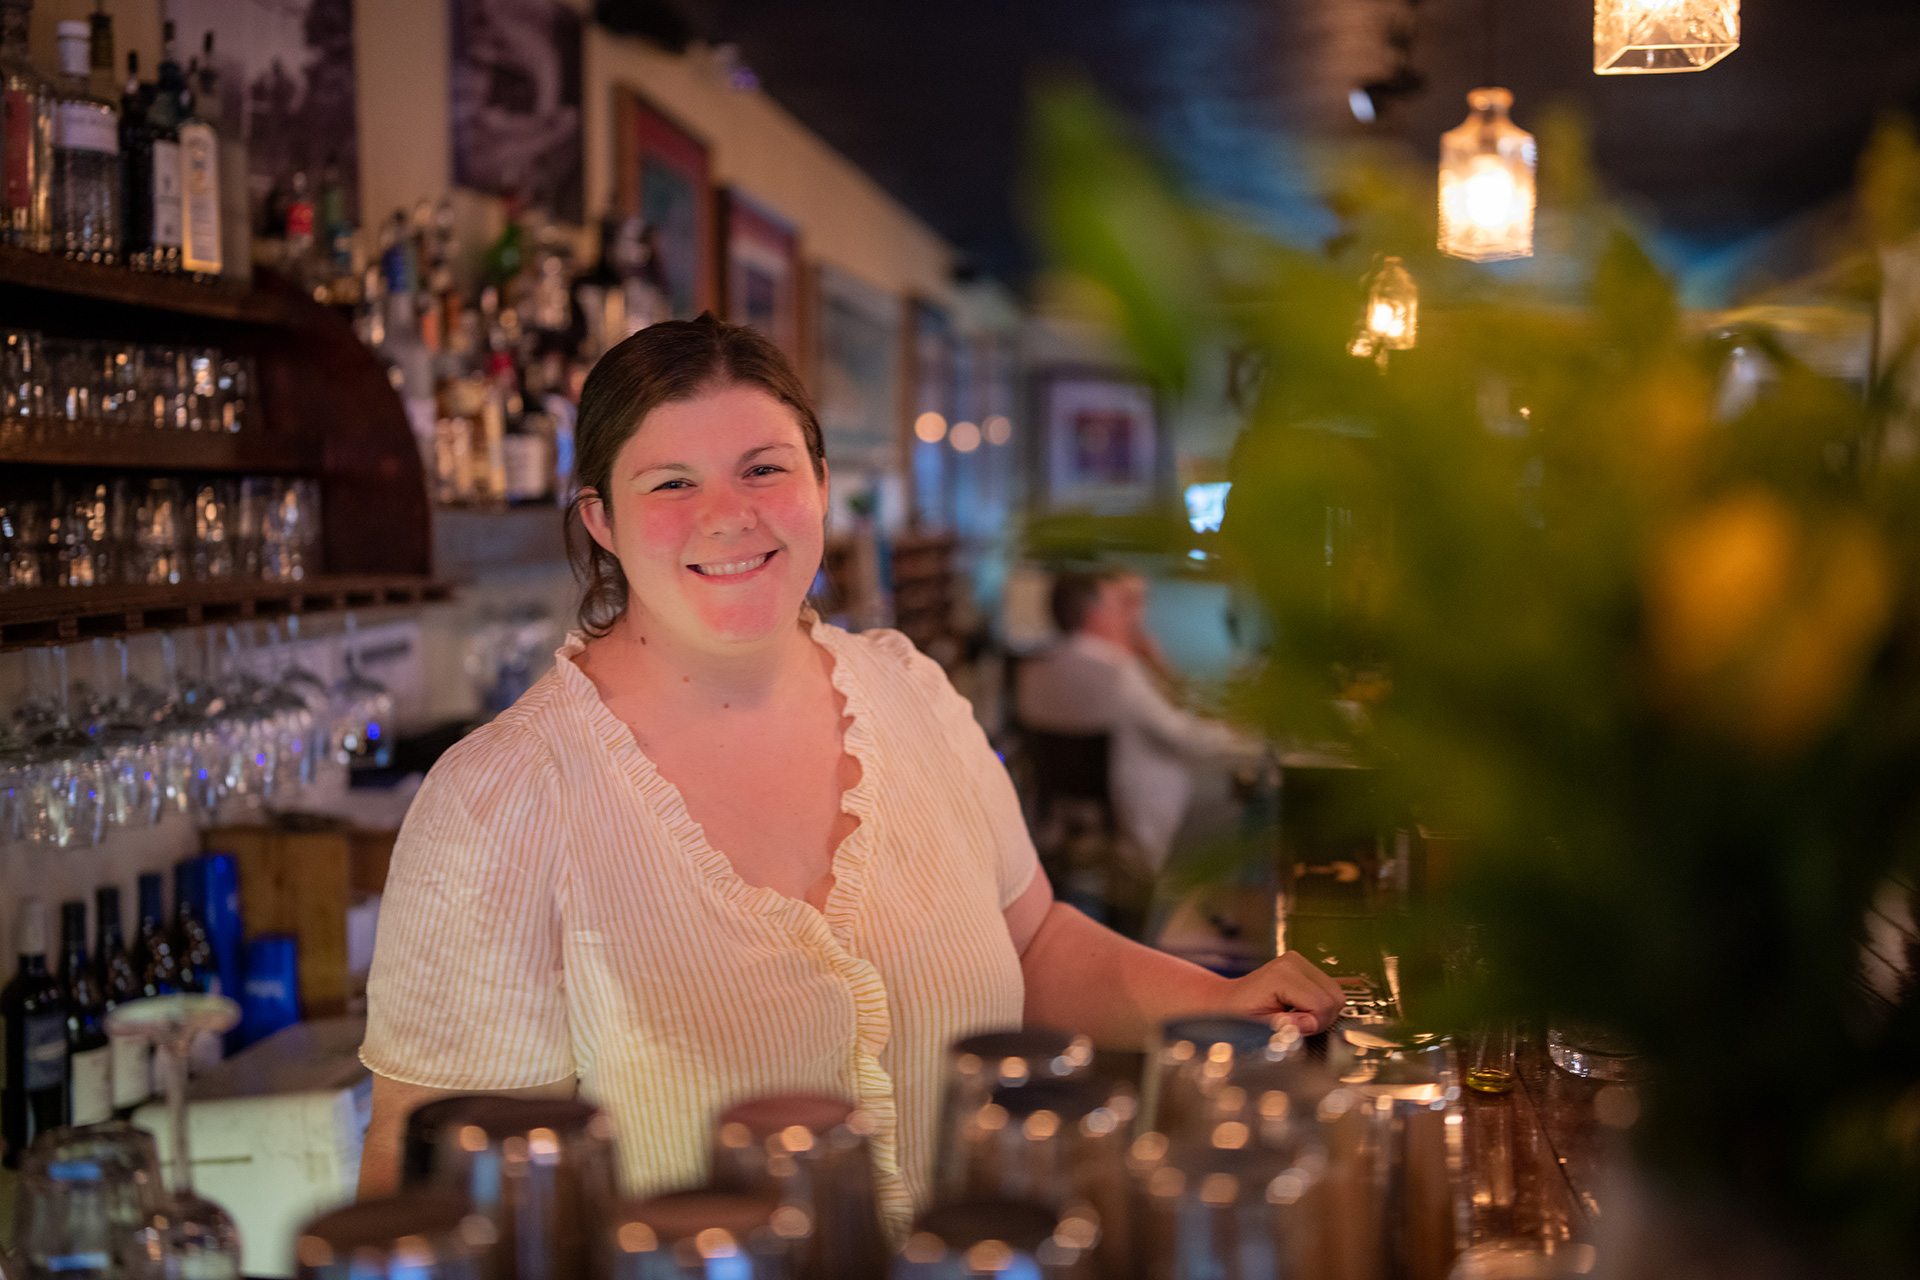 Restaurant namesake and manager Gabrielle Sonnier Prudhomme behind the bar at Gabrielle